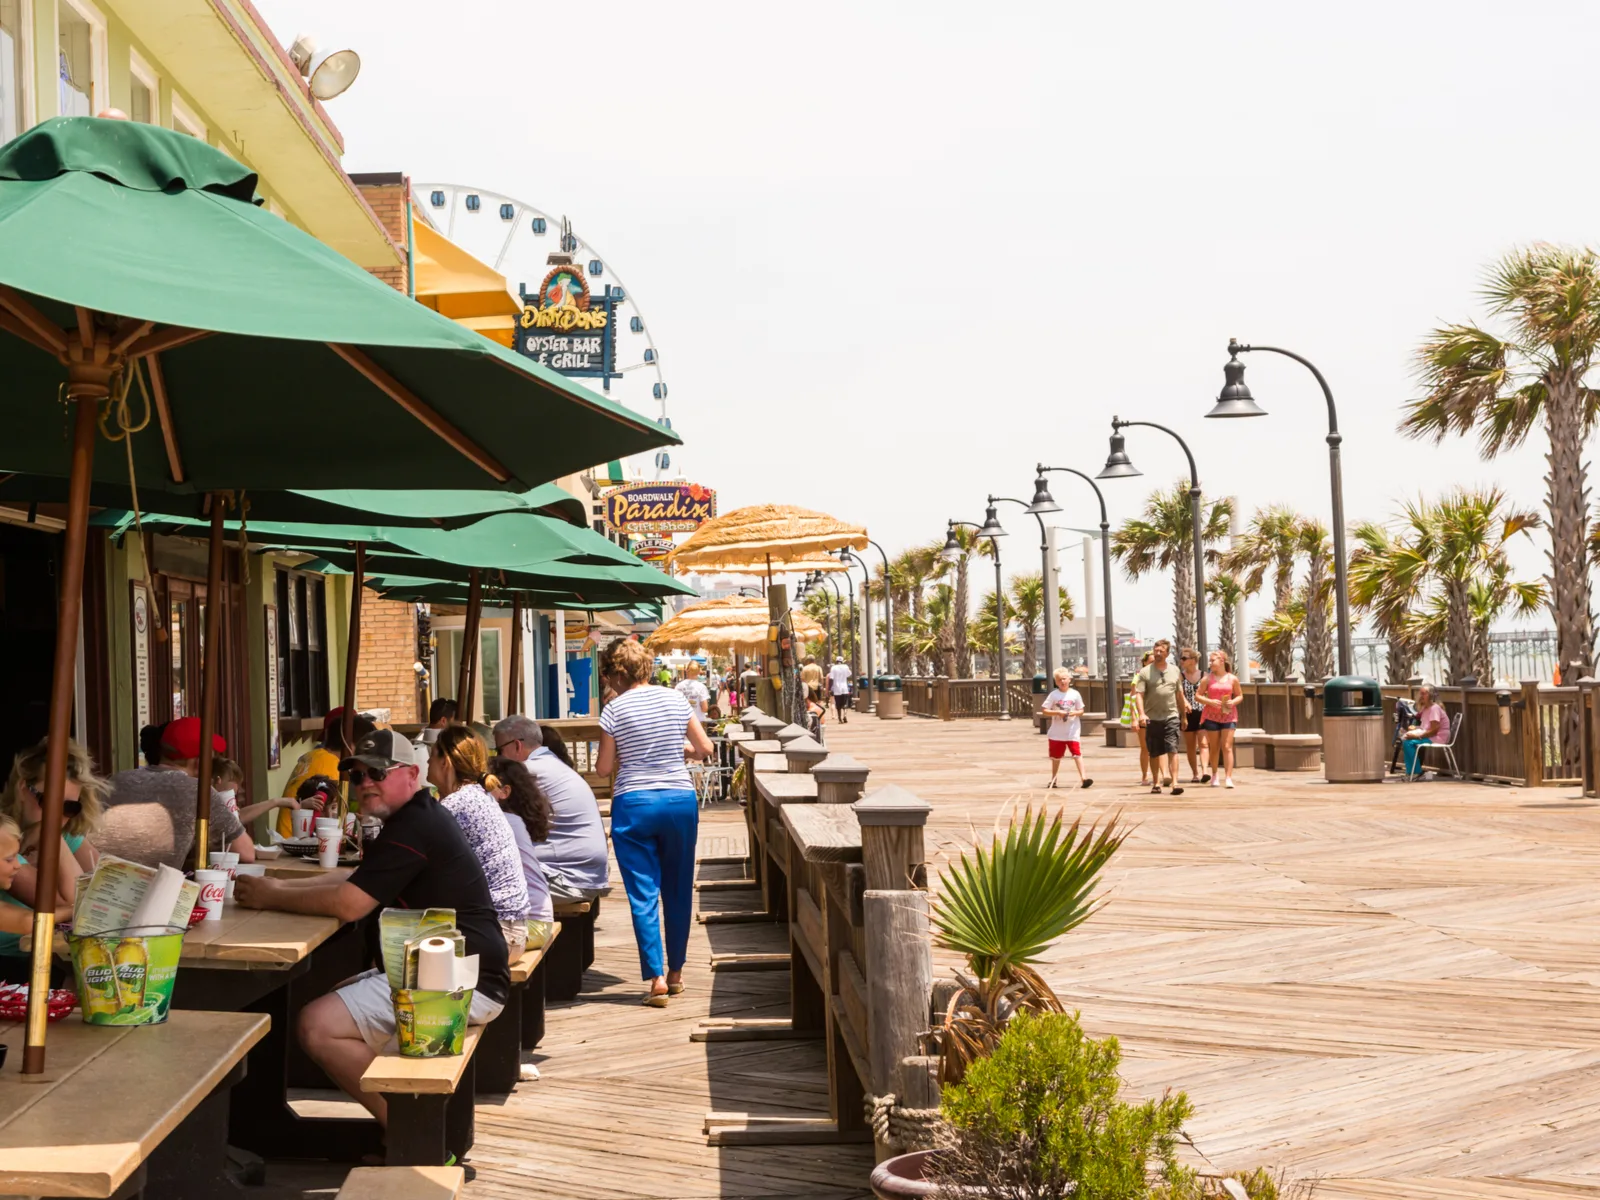 Myrtle beach boardwalk with restaurants and outdoor seating